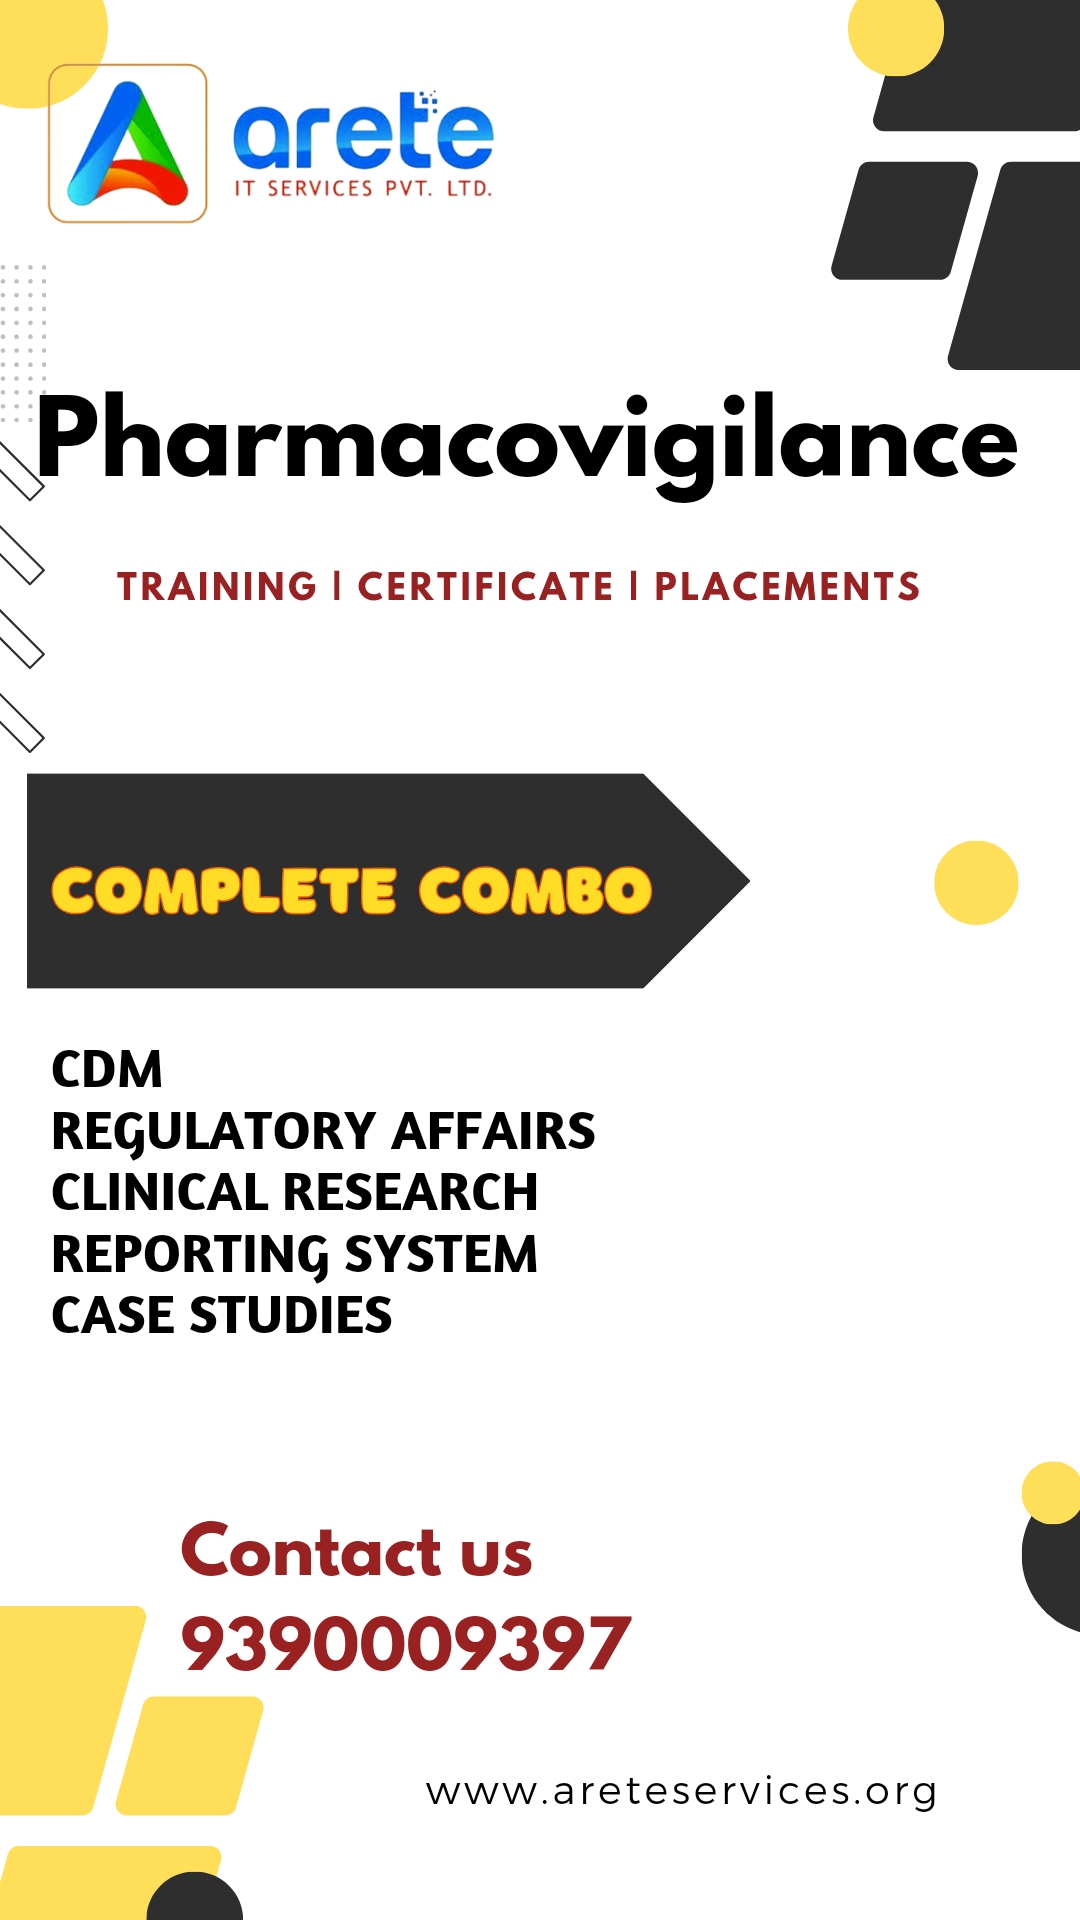 Pharmacovigilance training and placements with certificate  - Andhra Pradesh - Guntur ID1522299